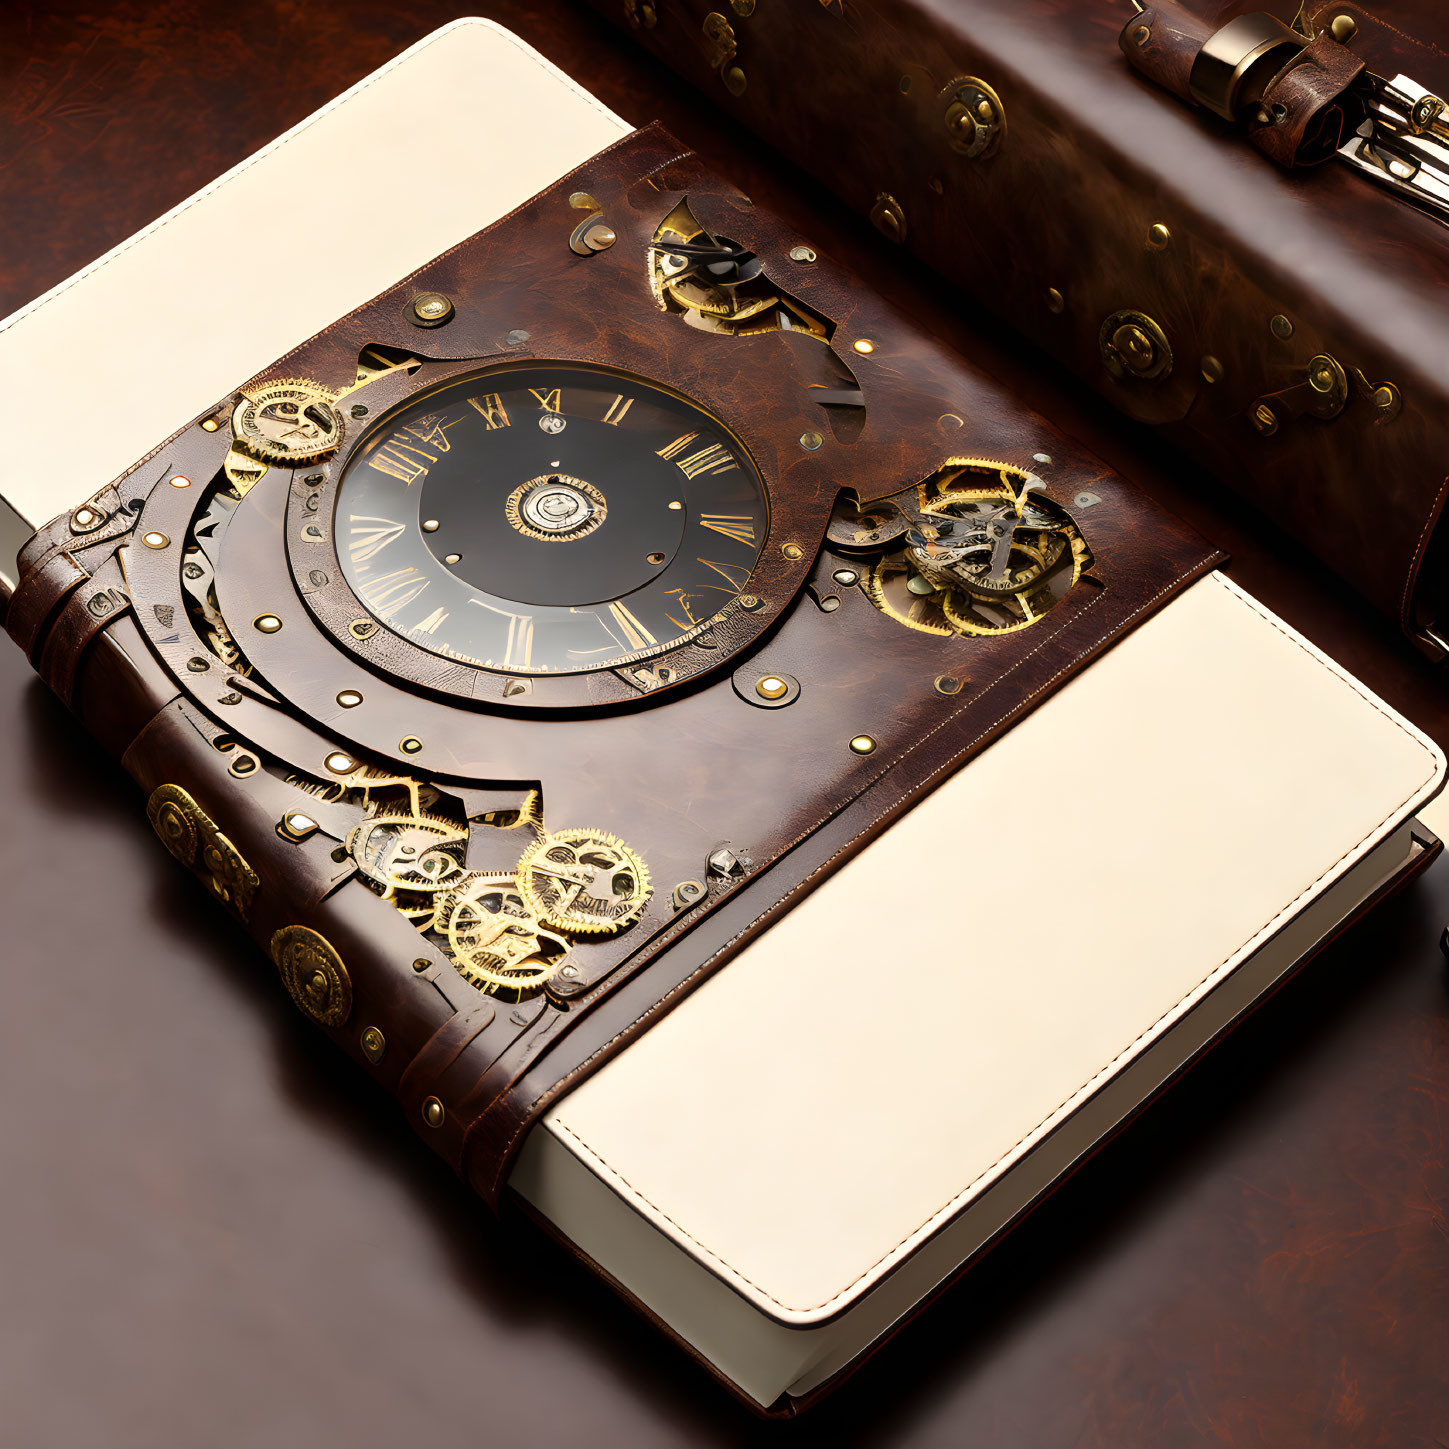 Steampunk-inspired leather journal with metallic gears and clock face on dark surface